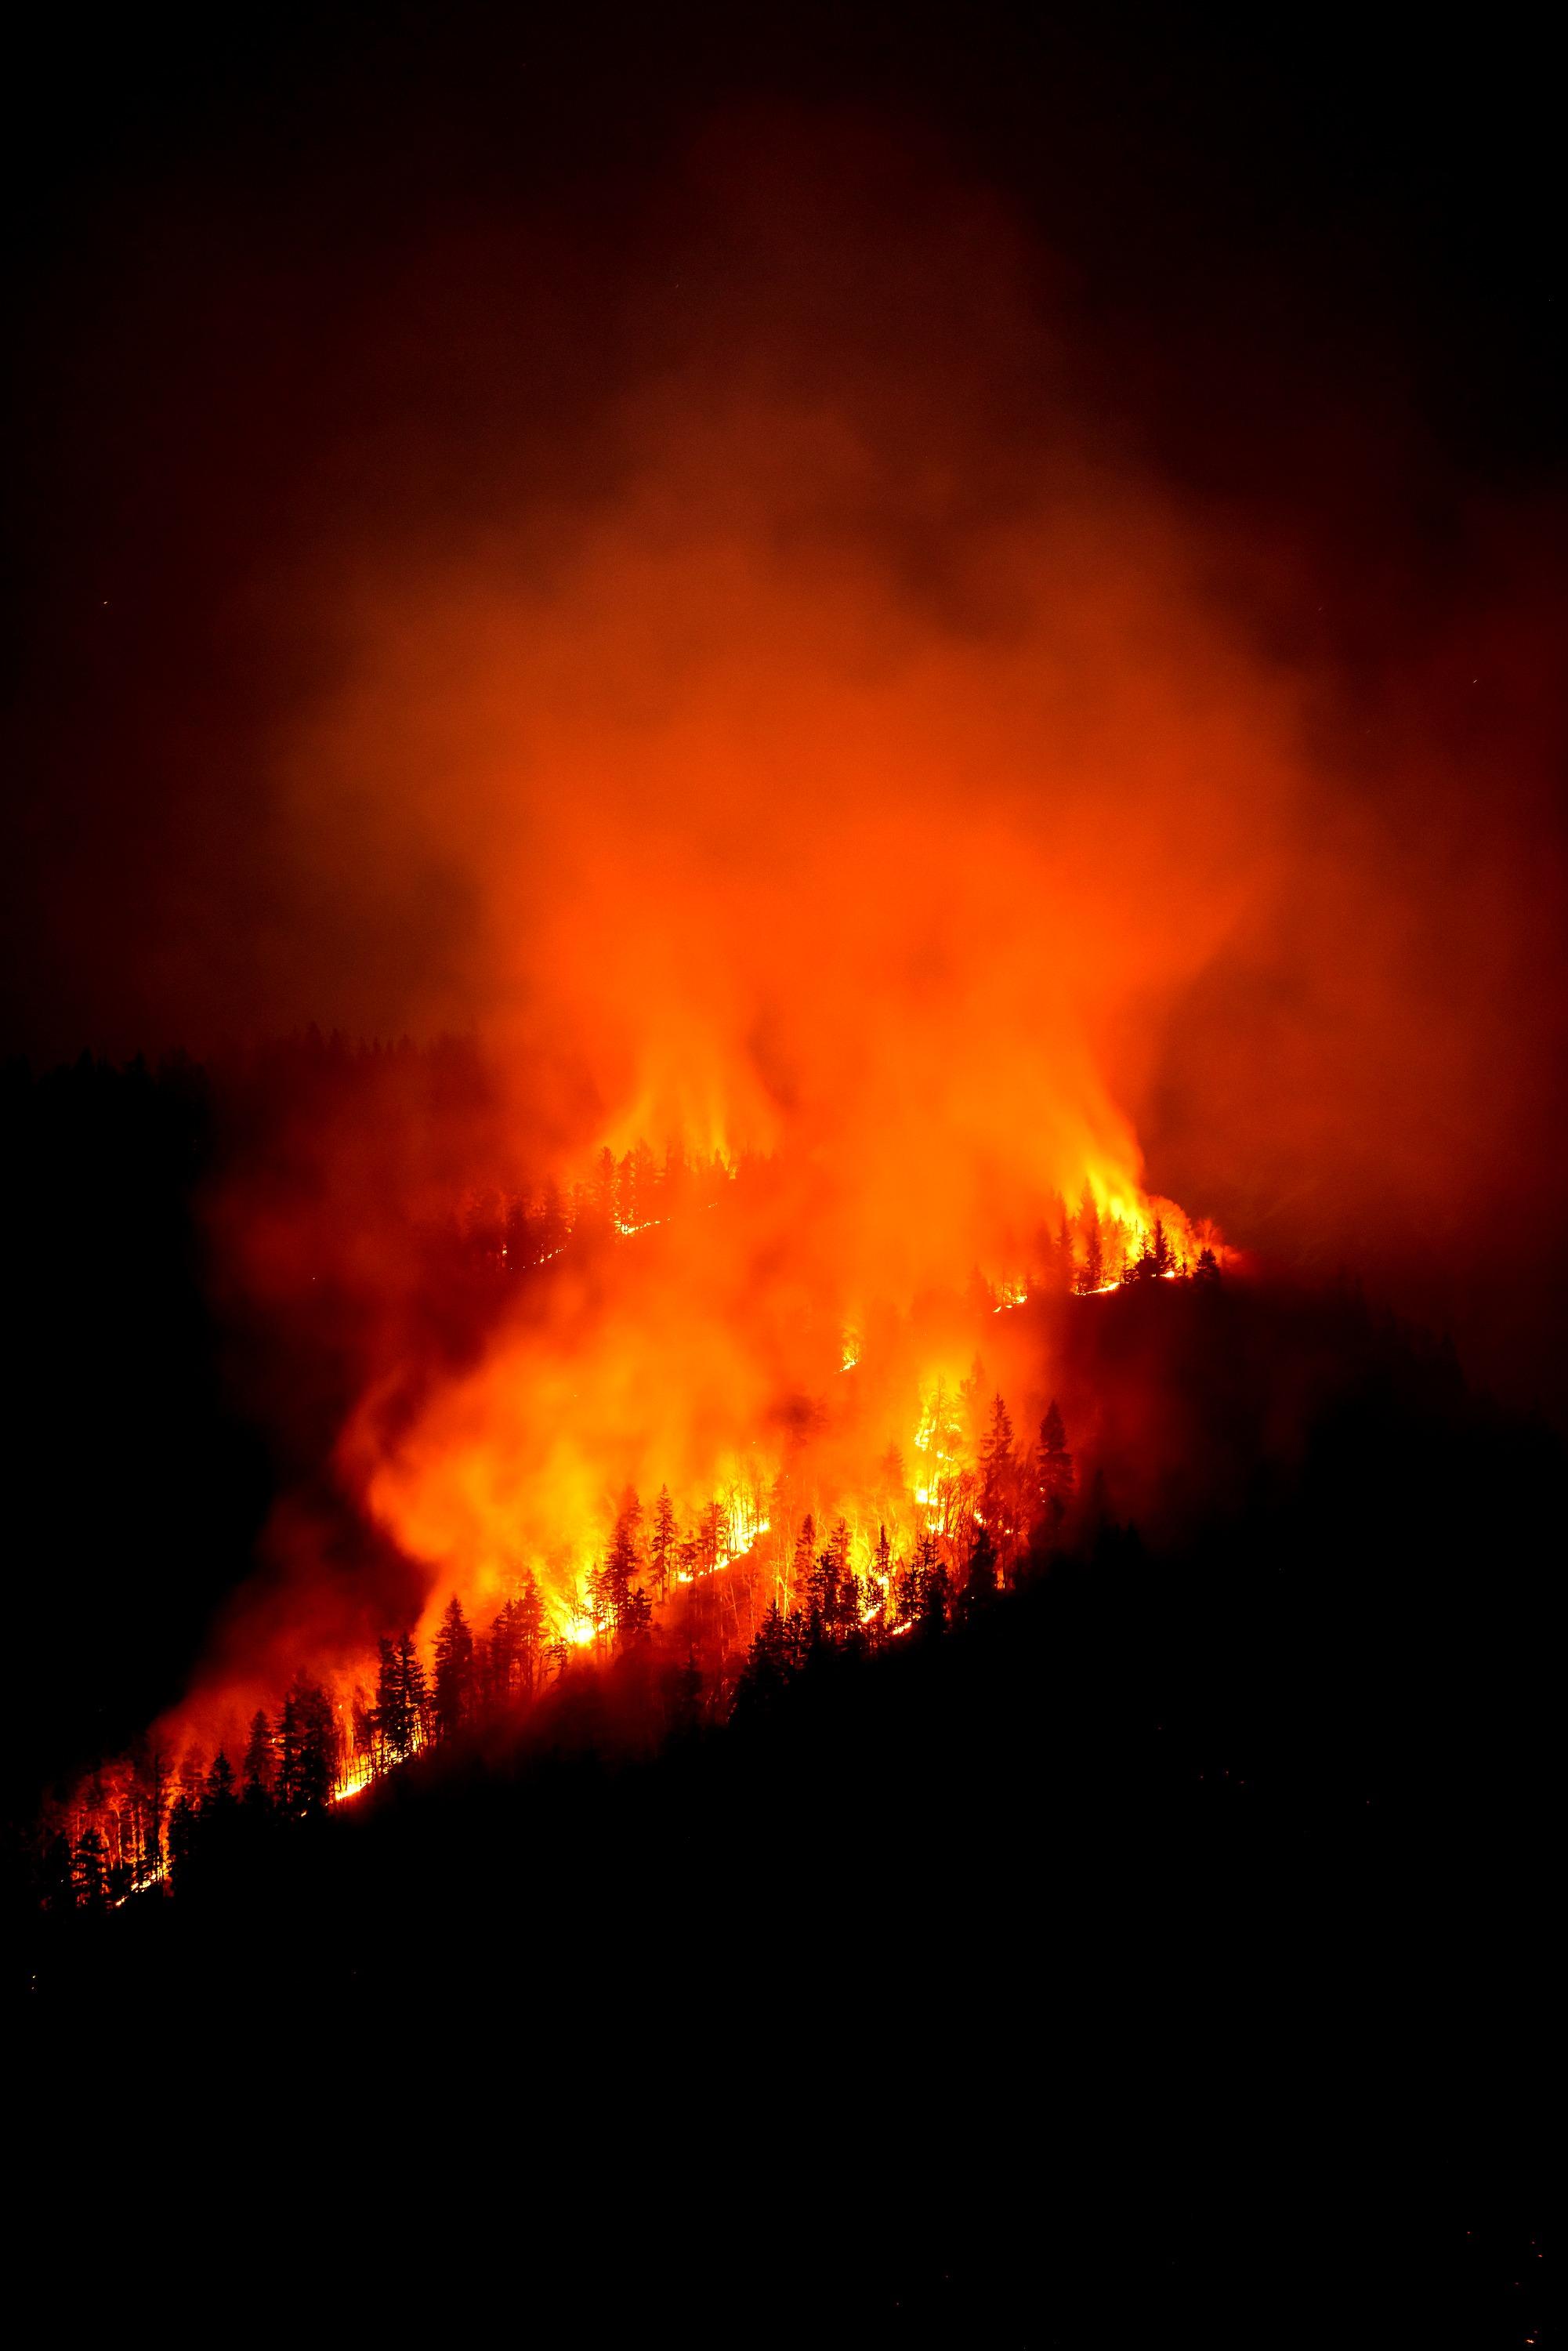 Placeholder image of a fire